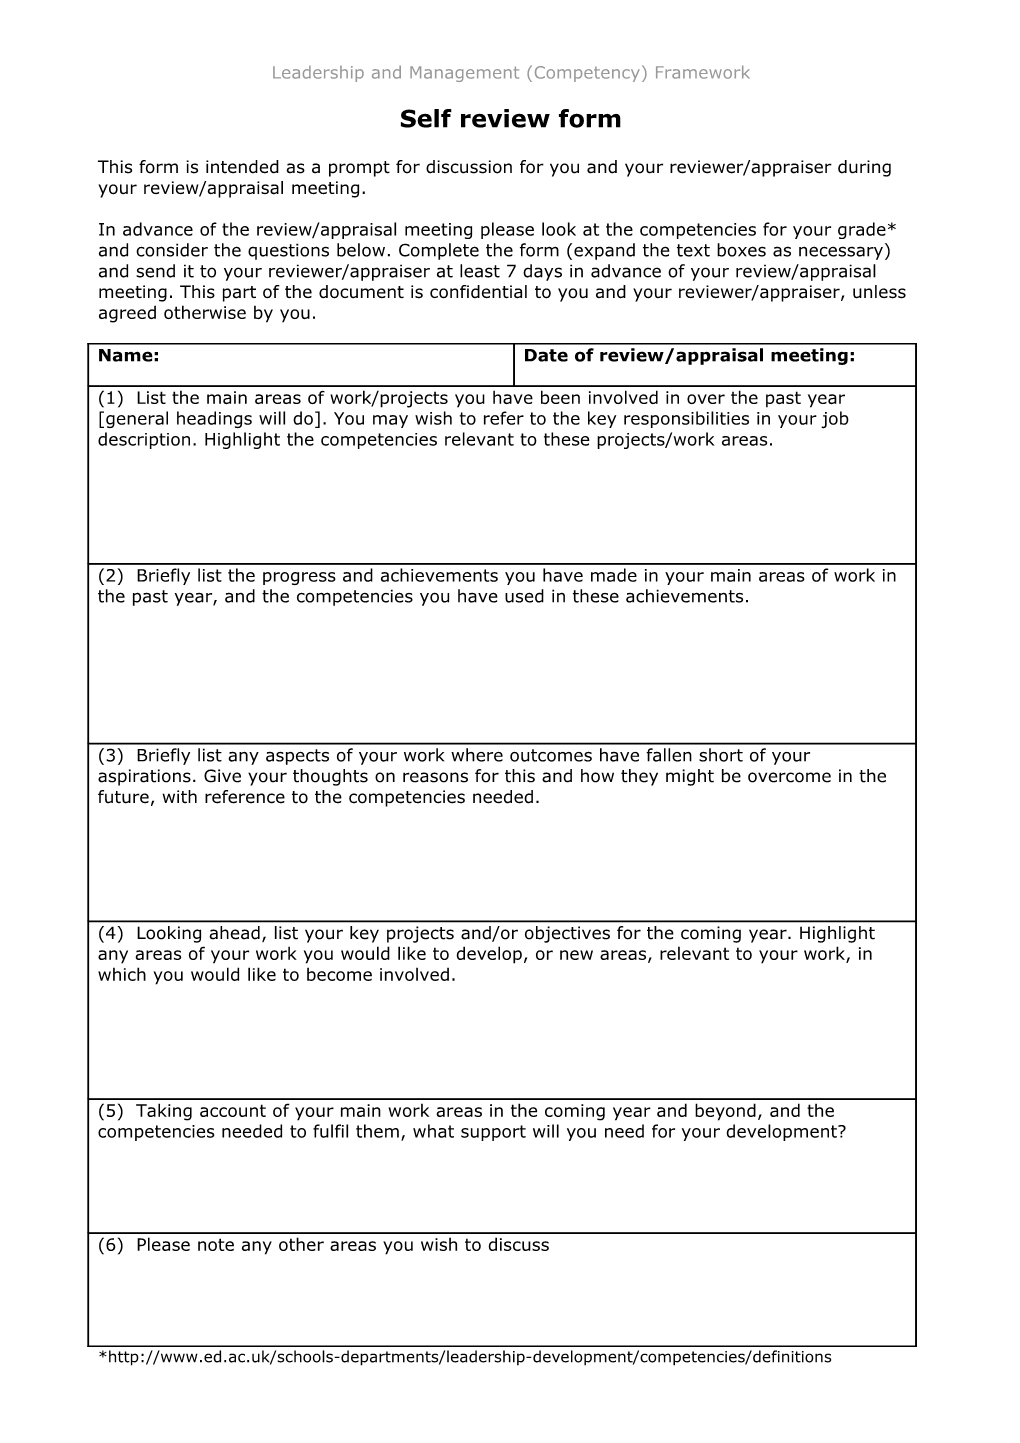 Appraisal Self Review Form